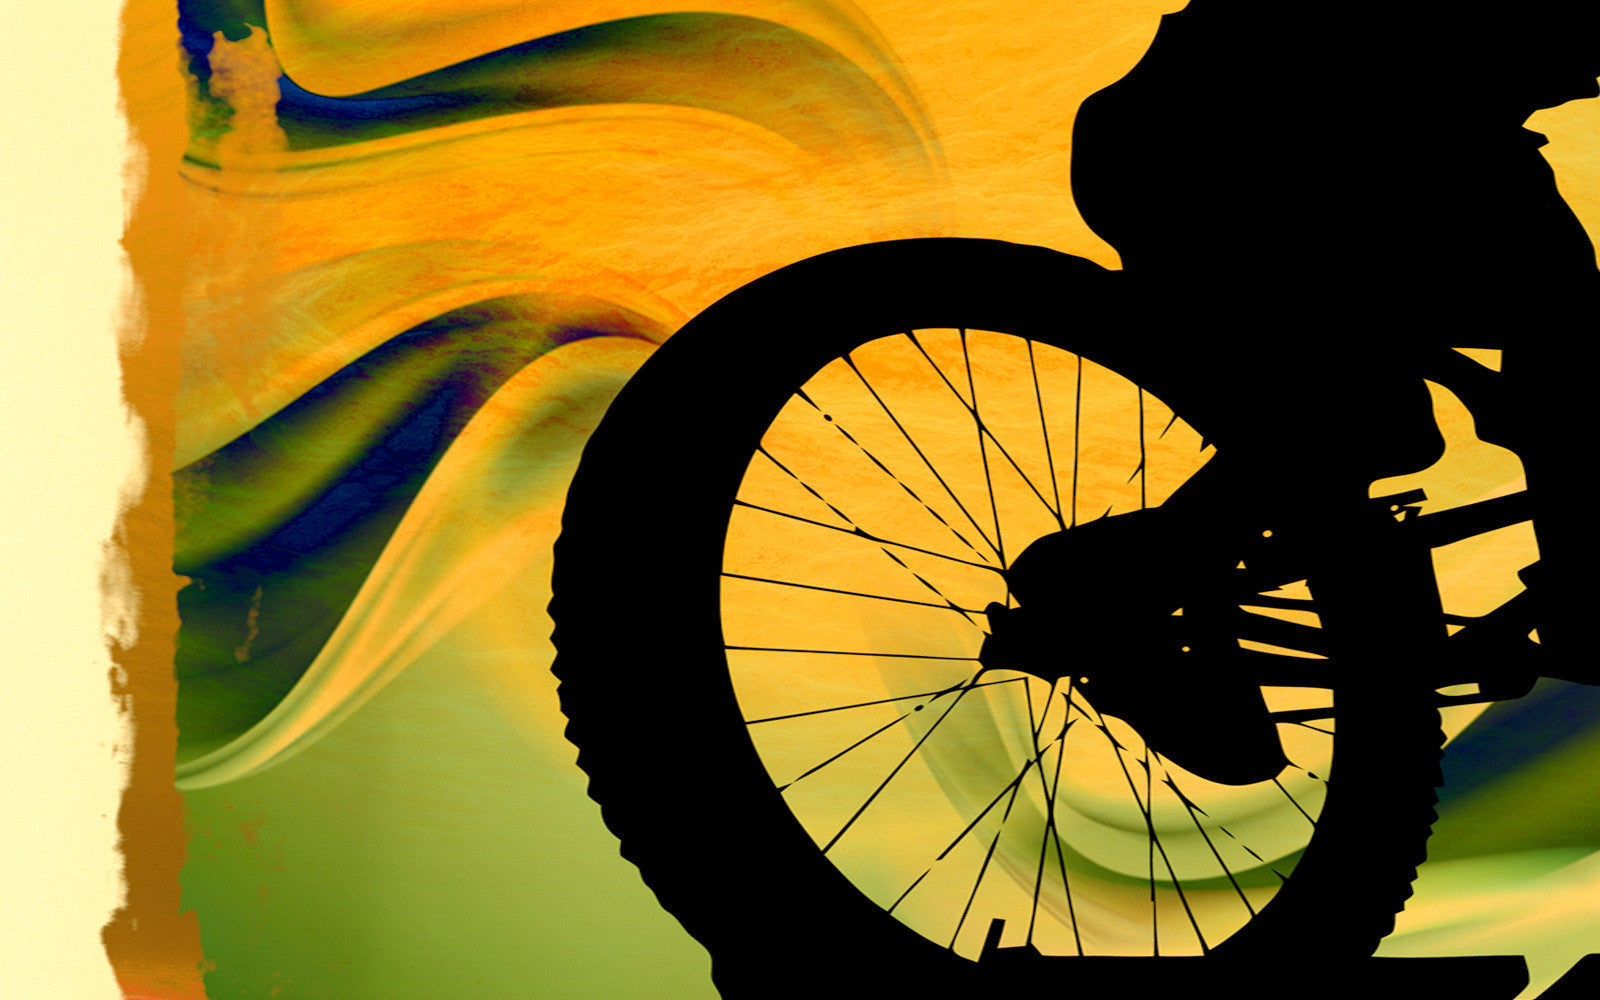 Black silhouette of back wheel of mountain bike and biker against artistic background